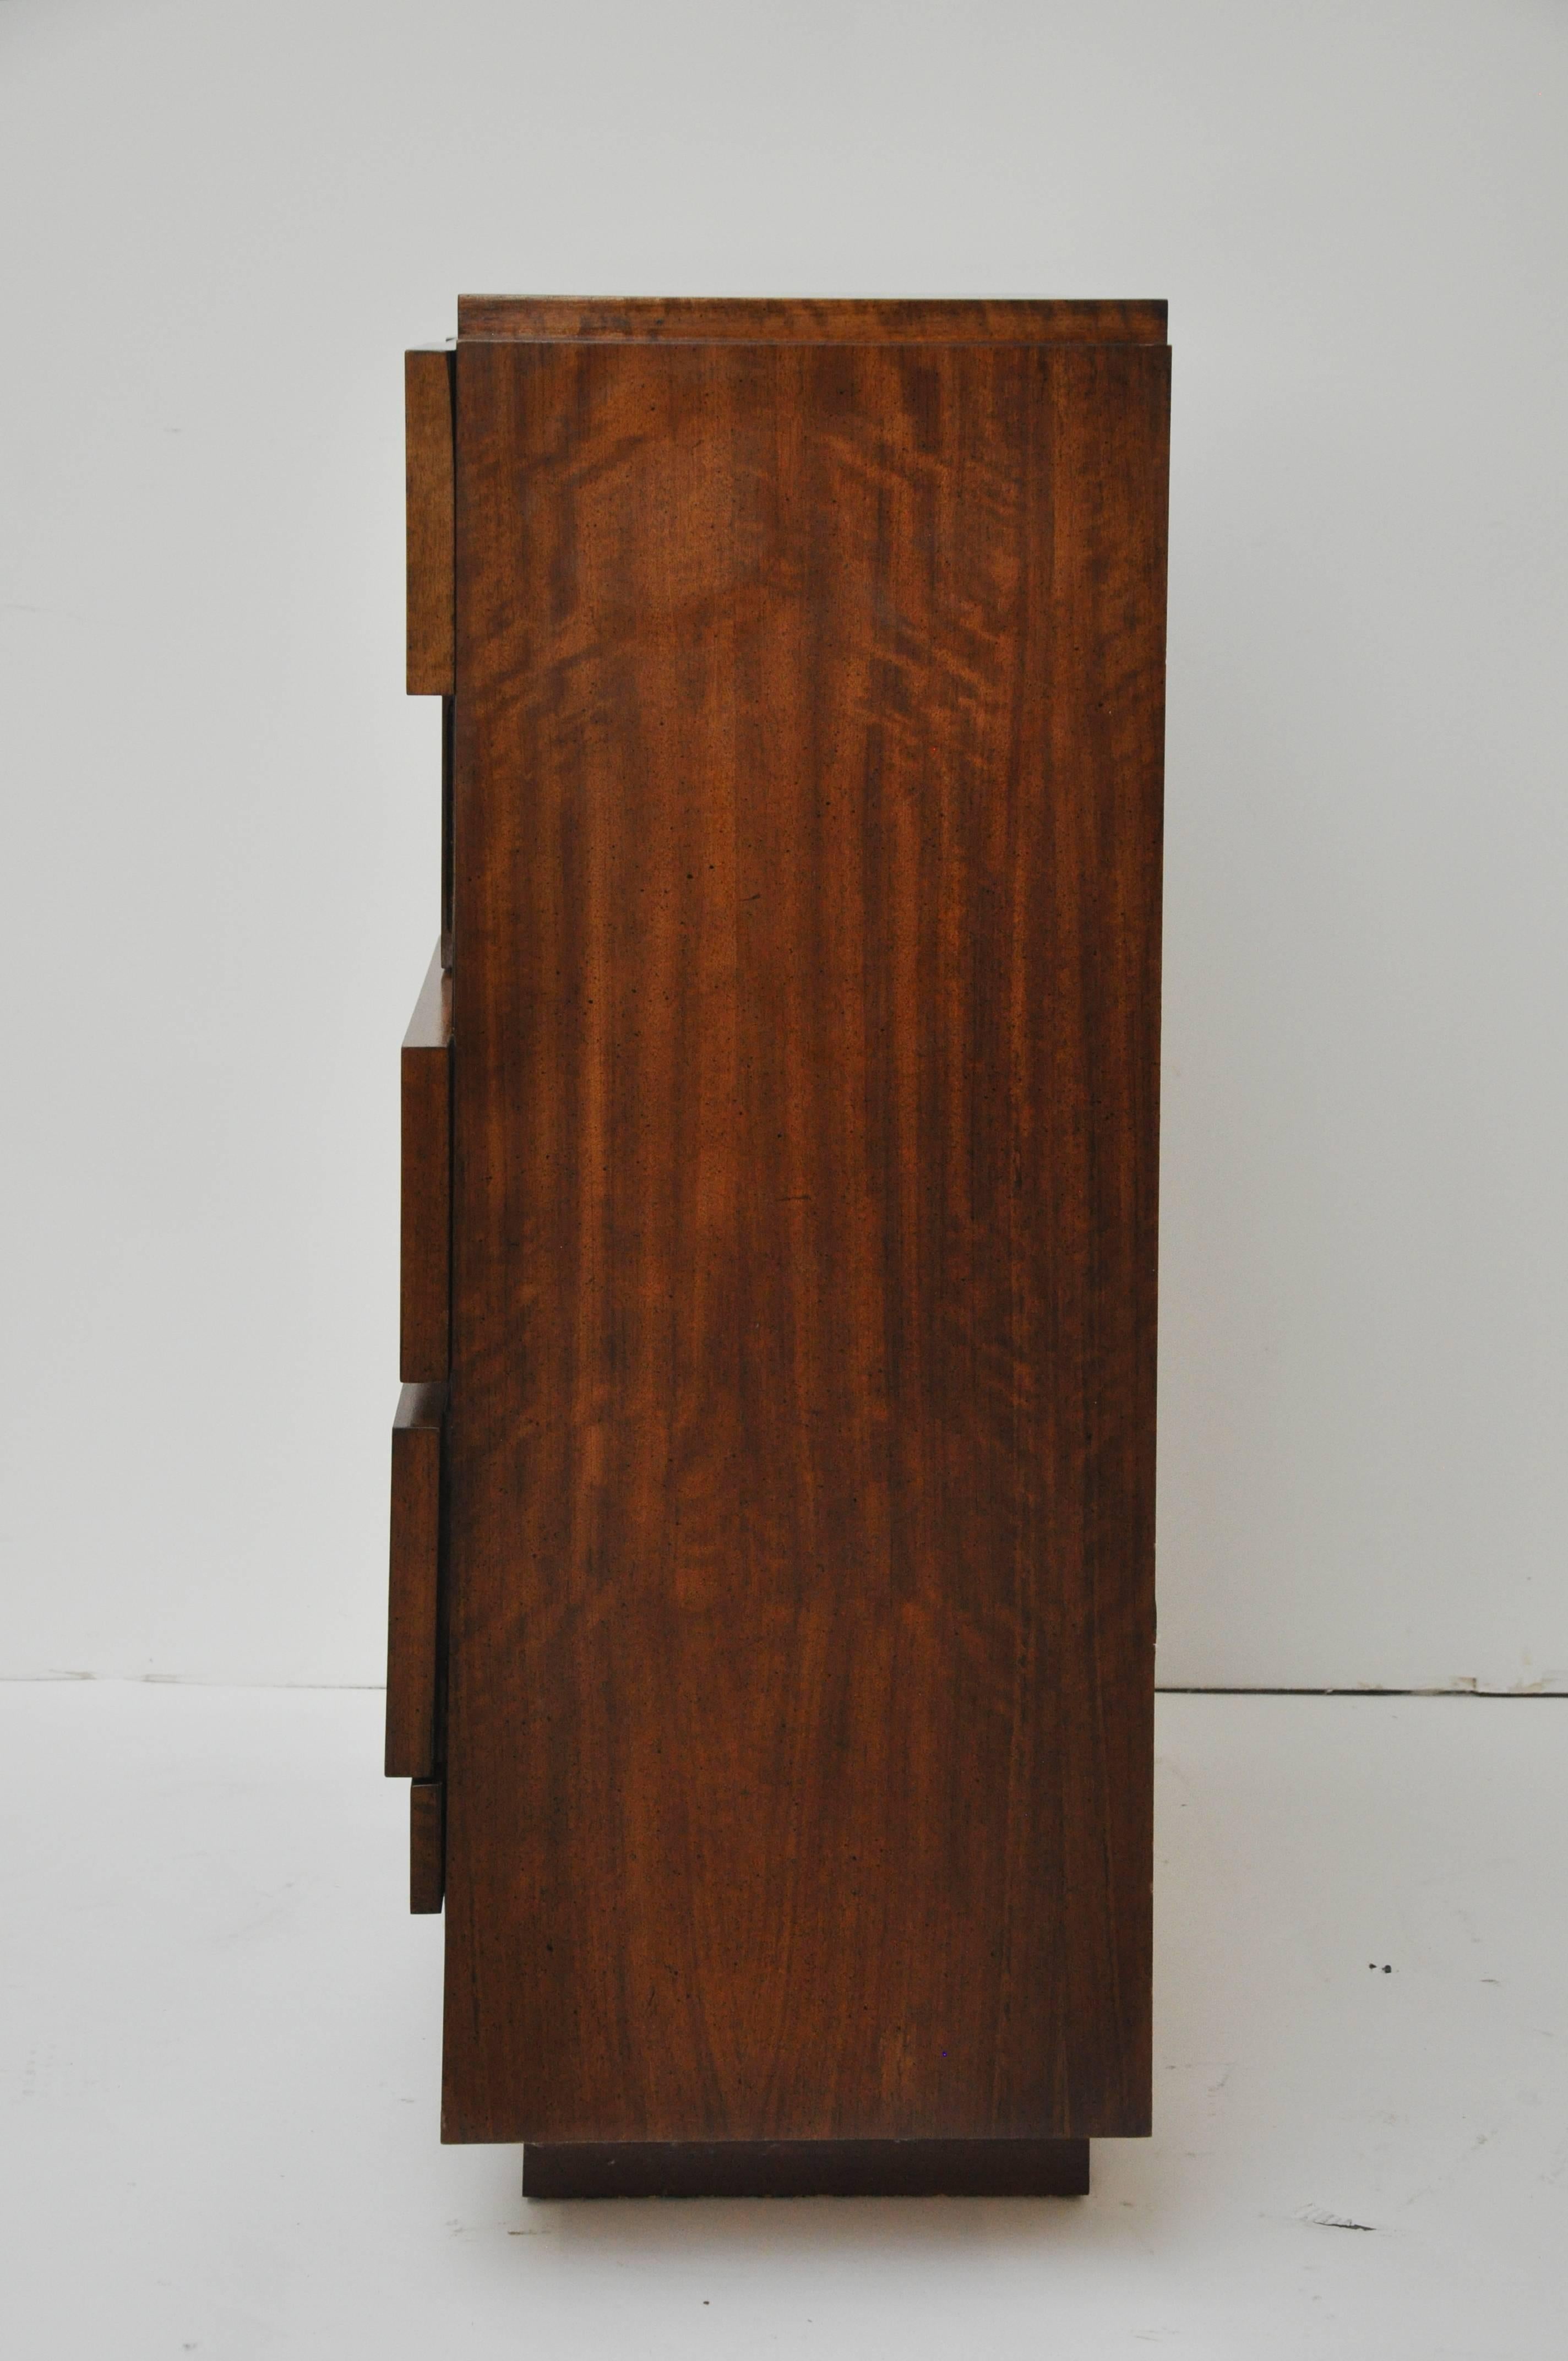 Mid-Century Modern highboy walnut dresser with five drawers from the Brutalist Mosaic Design series by Lane.